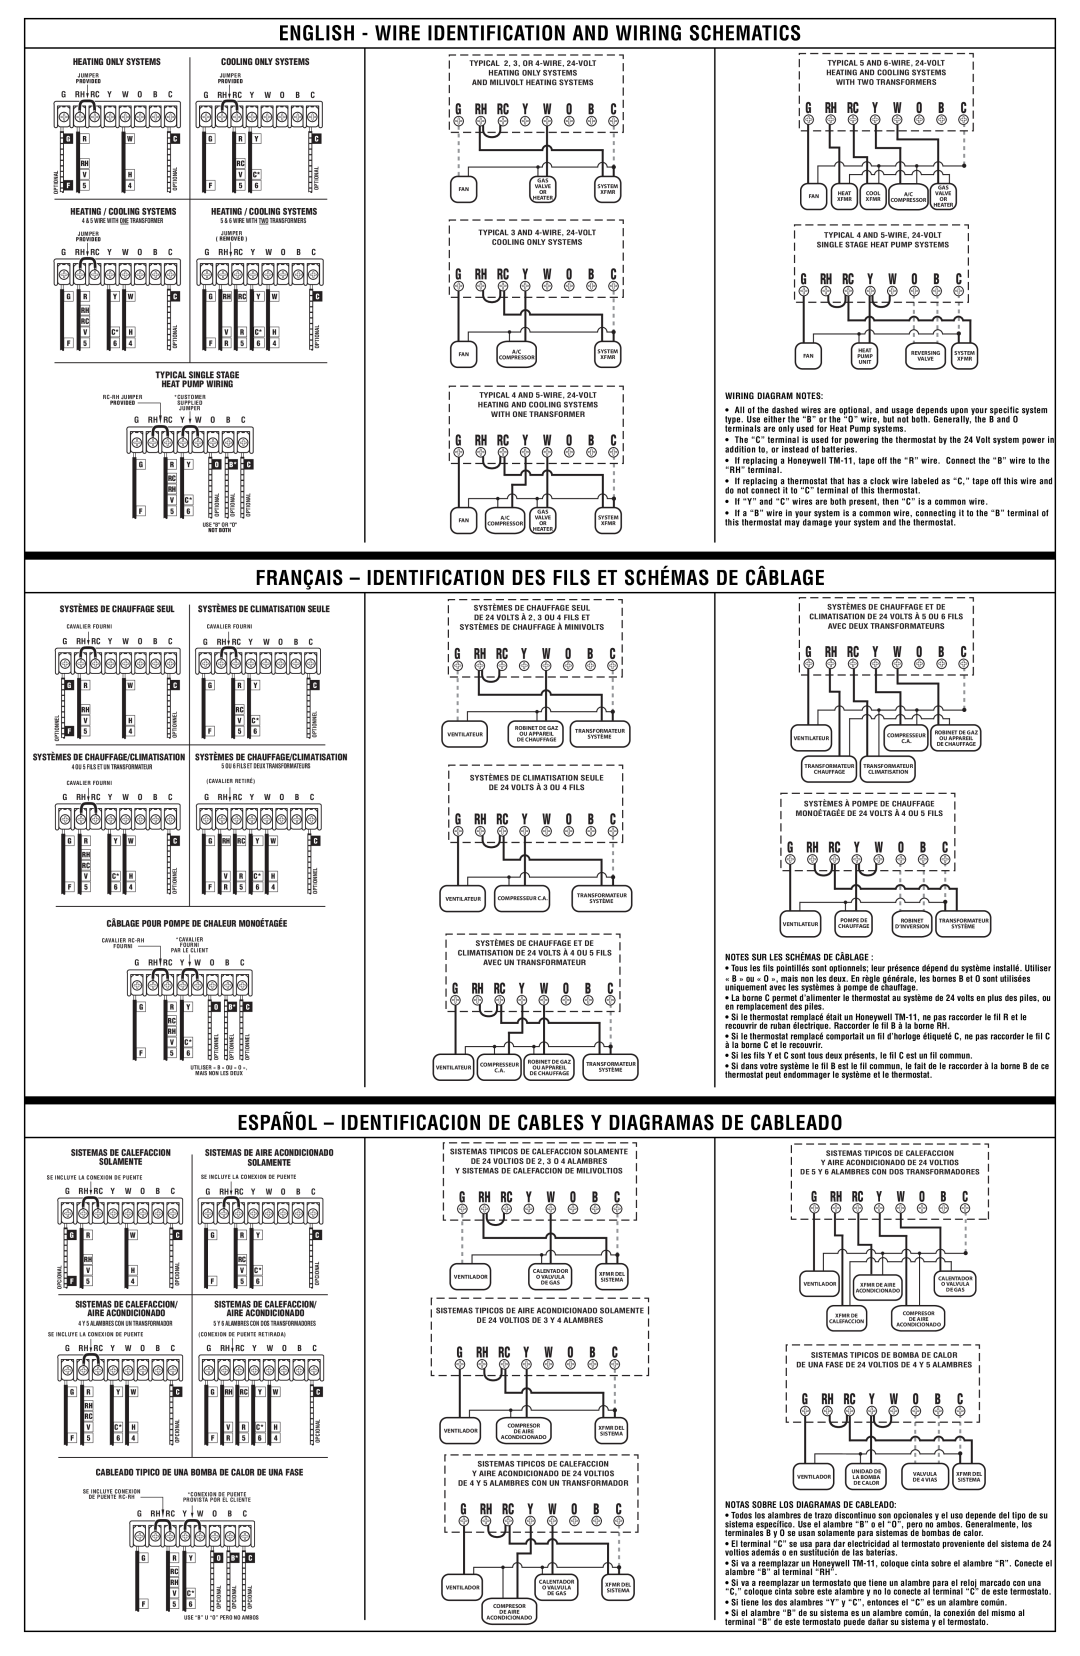 Lux Products TX1500E warranty English - Wire Identification And Wiring Schematics 